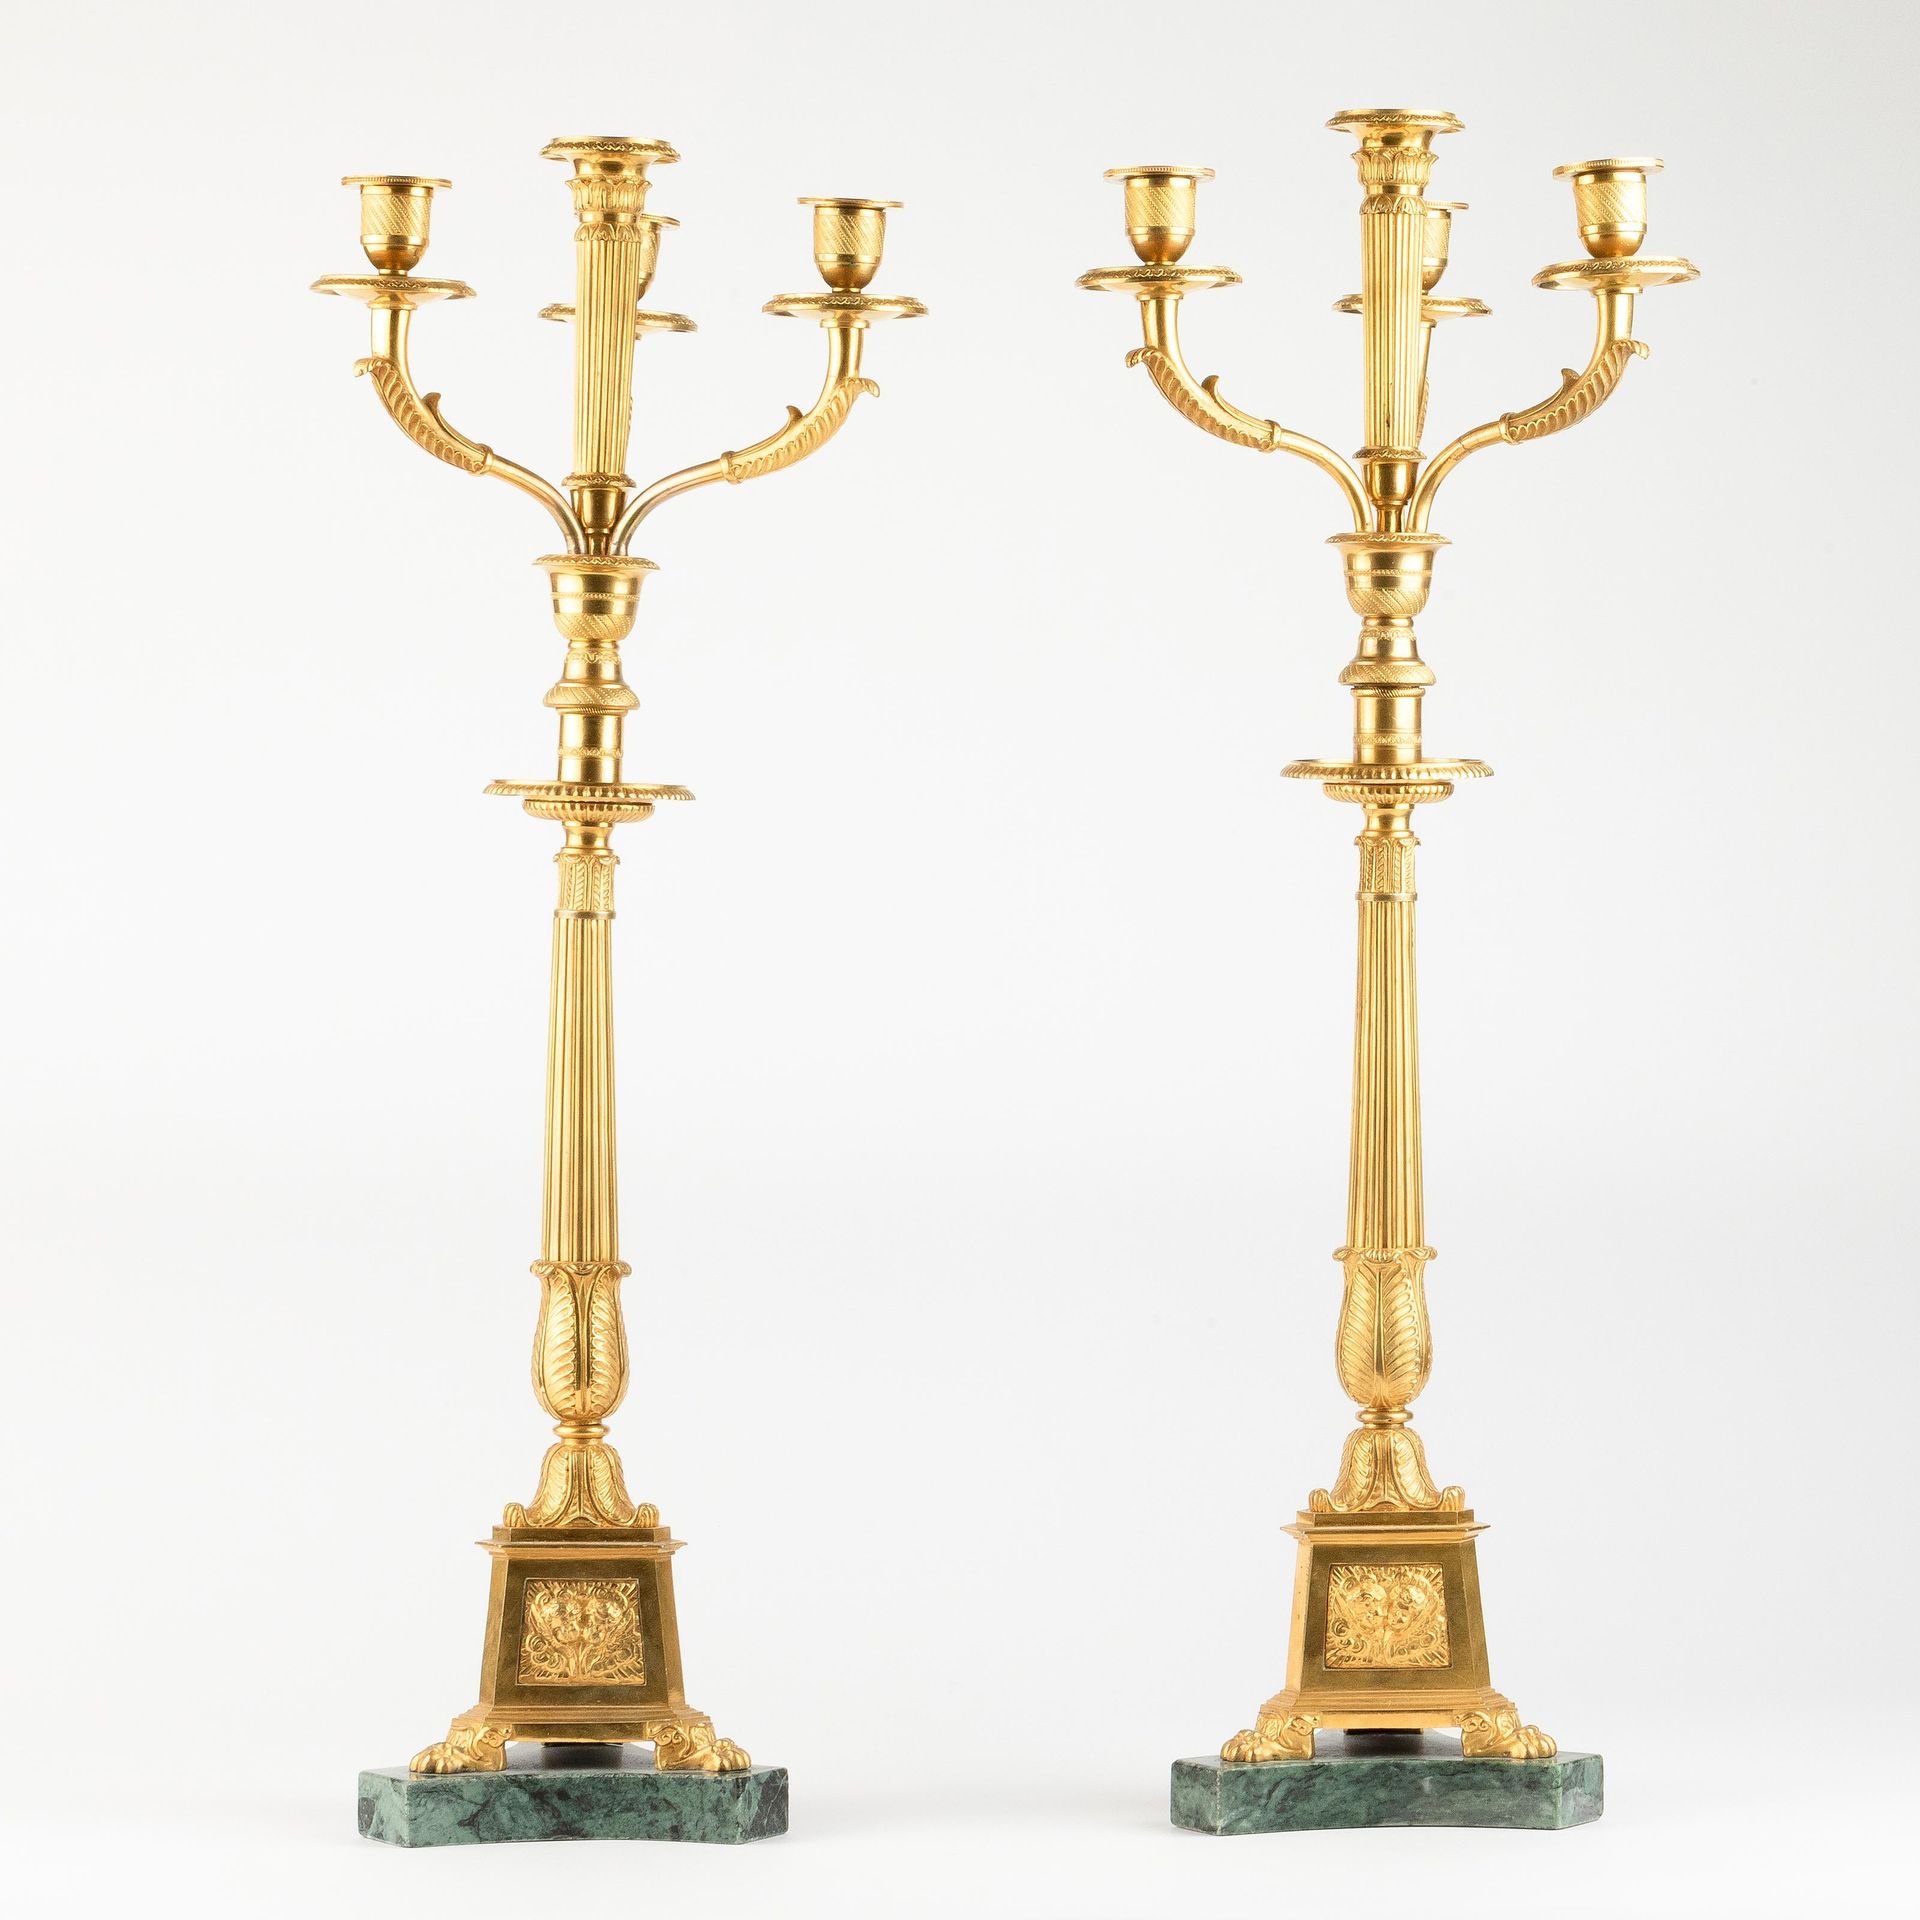 PIERRE PHILIPPE THOMIRE (1751-1843) (genre)
A pair of Empire-period four-branche&hellip;